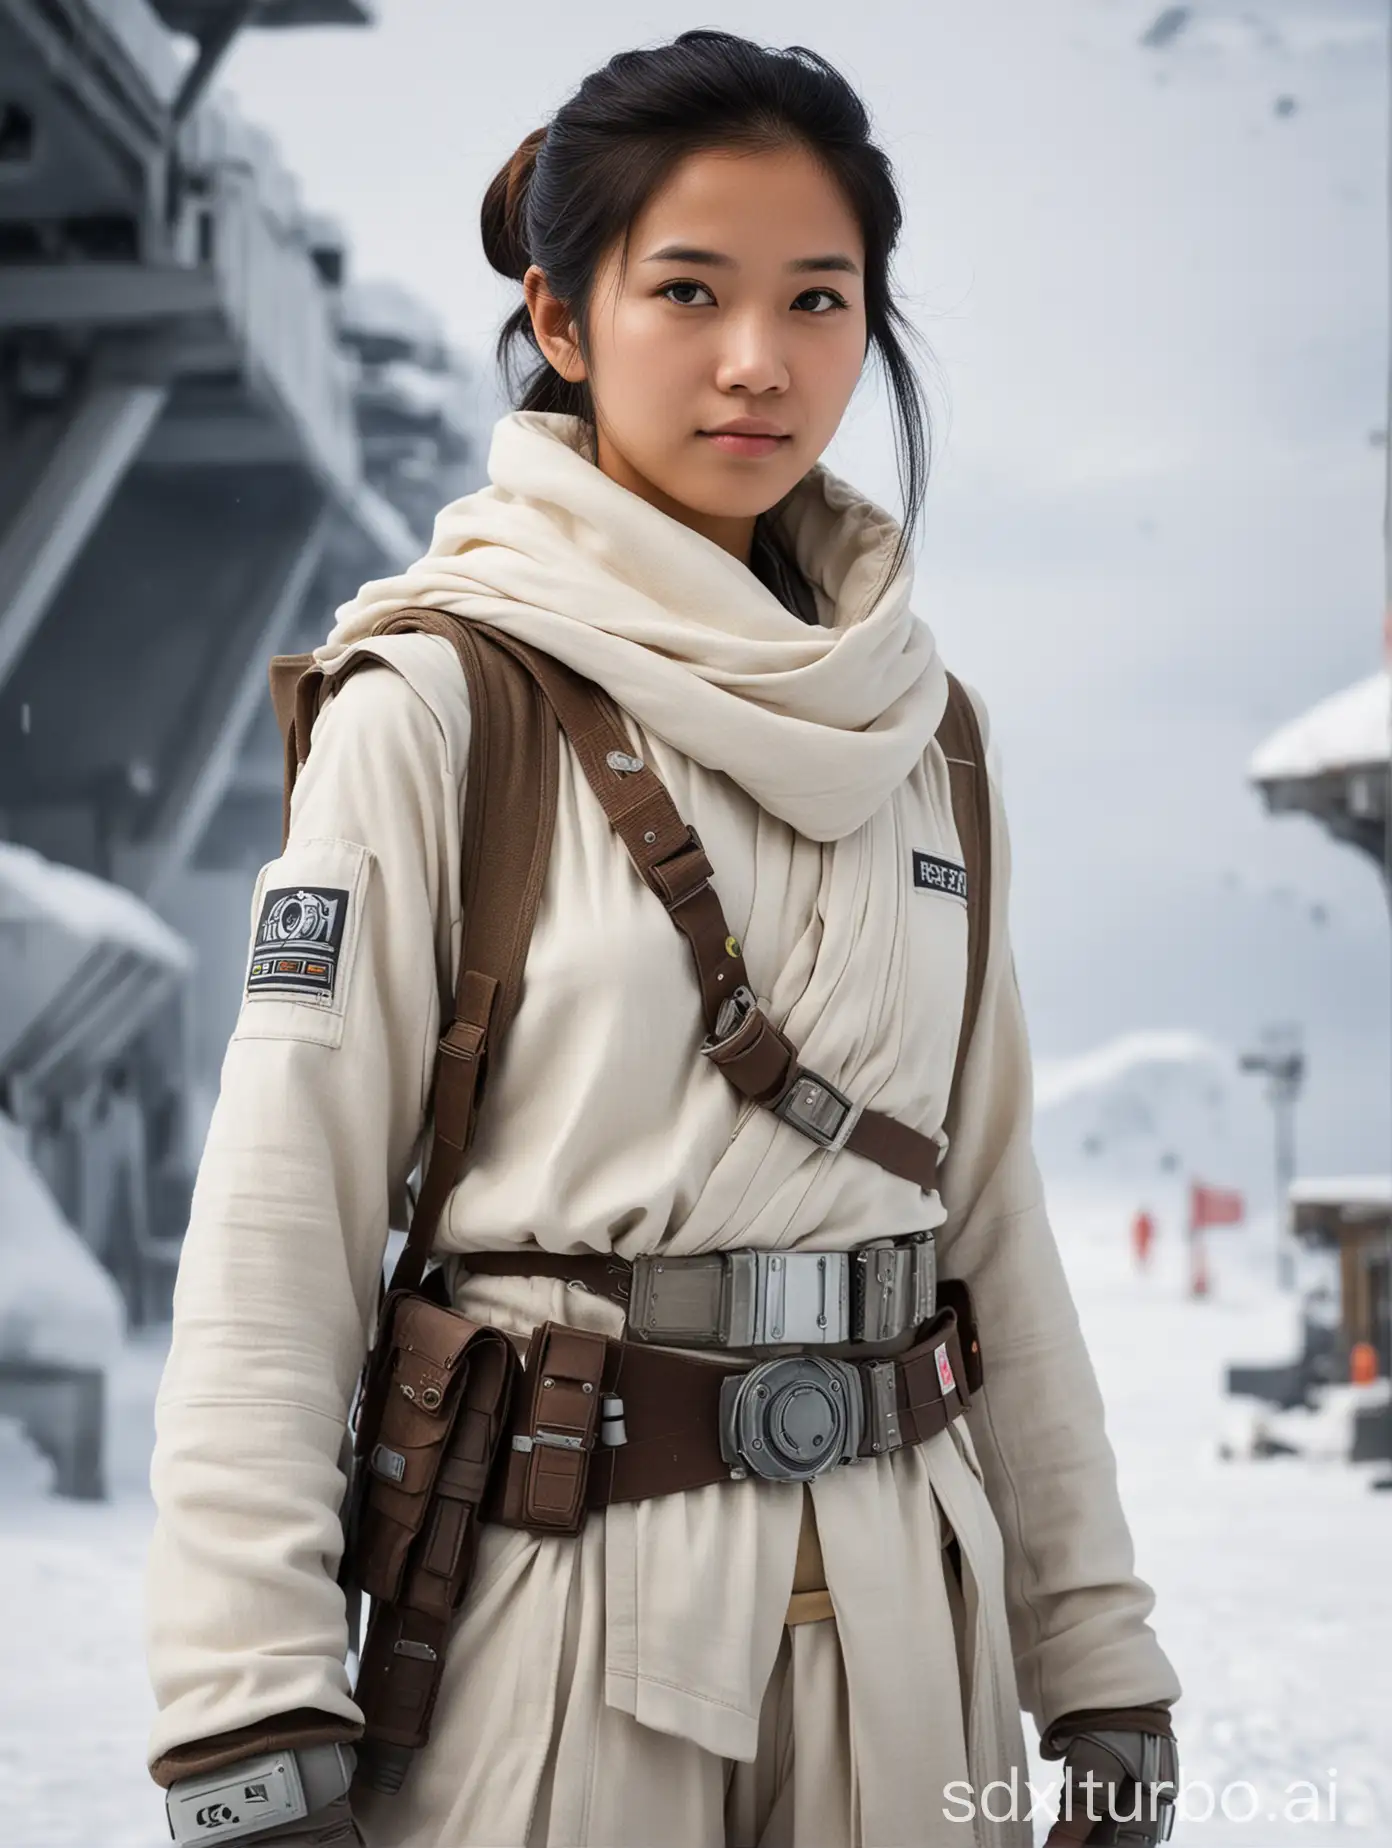 Teenage-Southeast-Asian-Jedi-Girl-at-Hoth-Spaceport